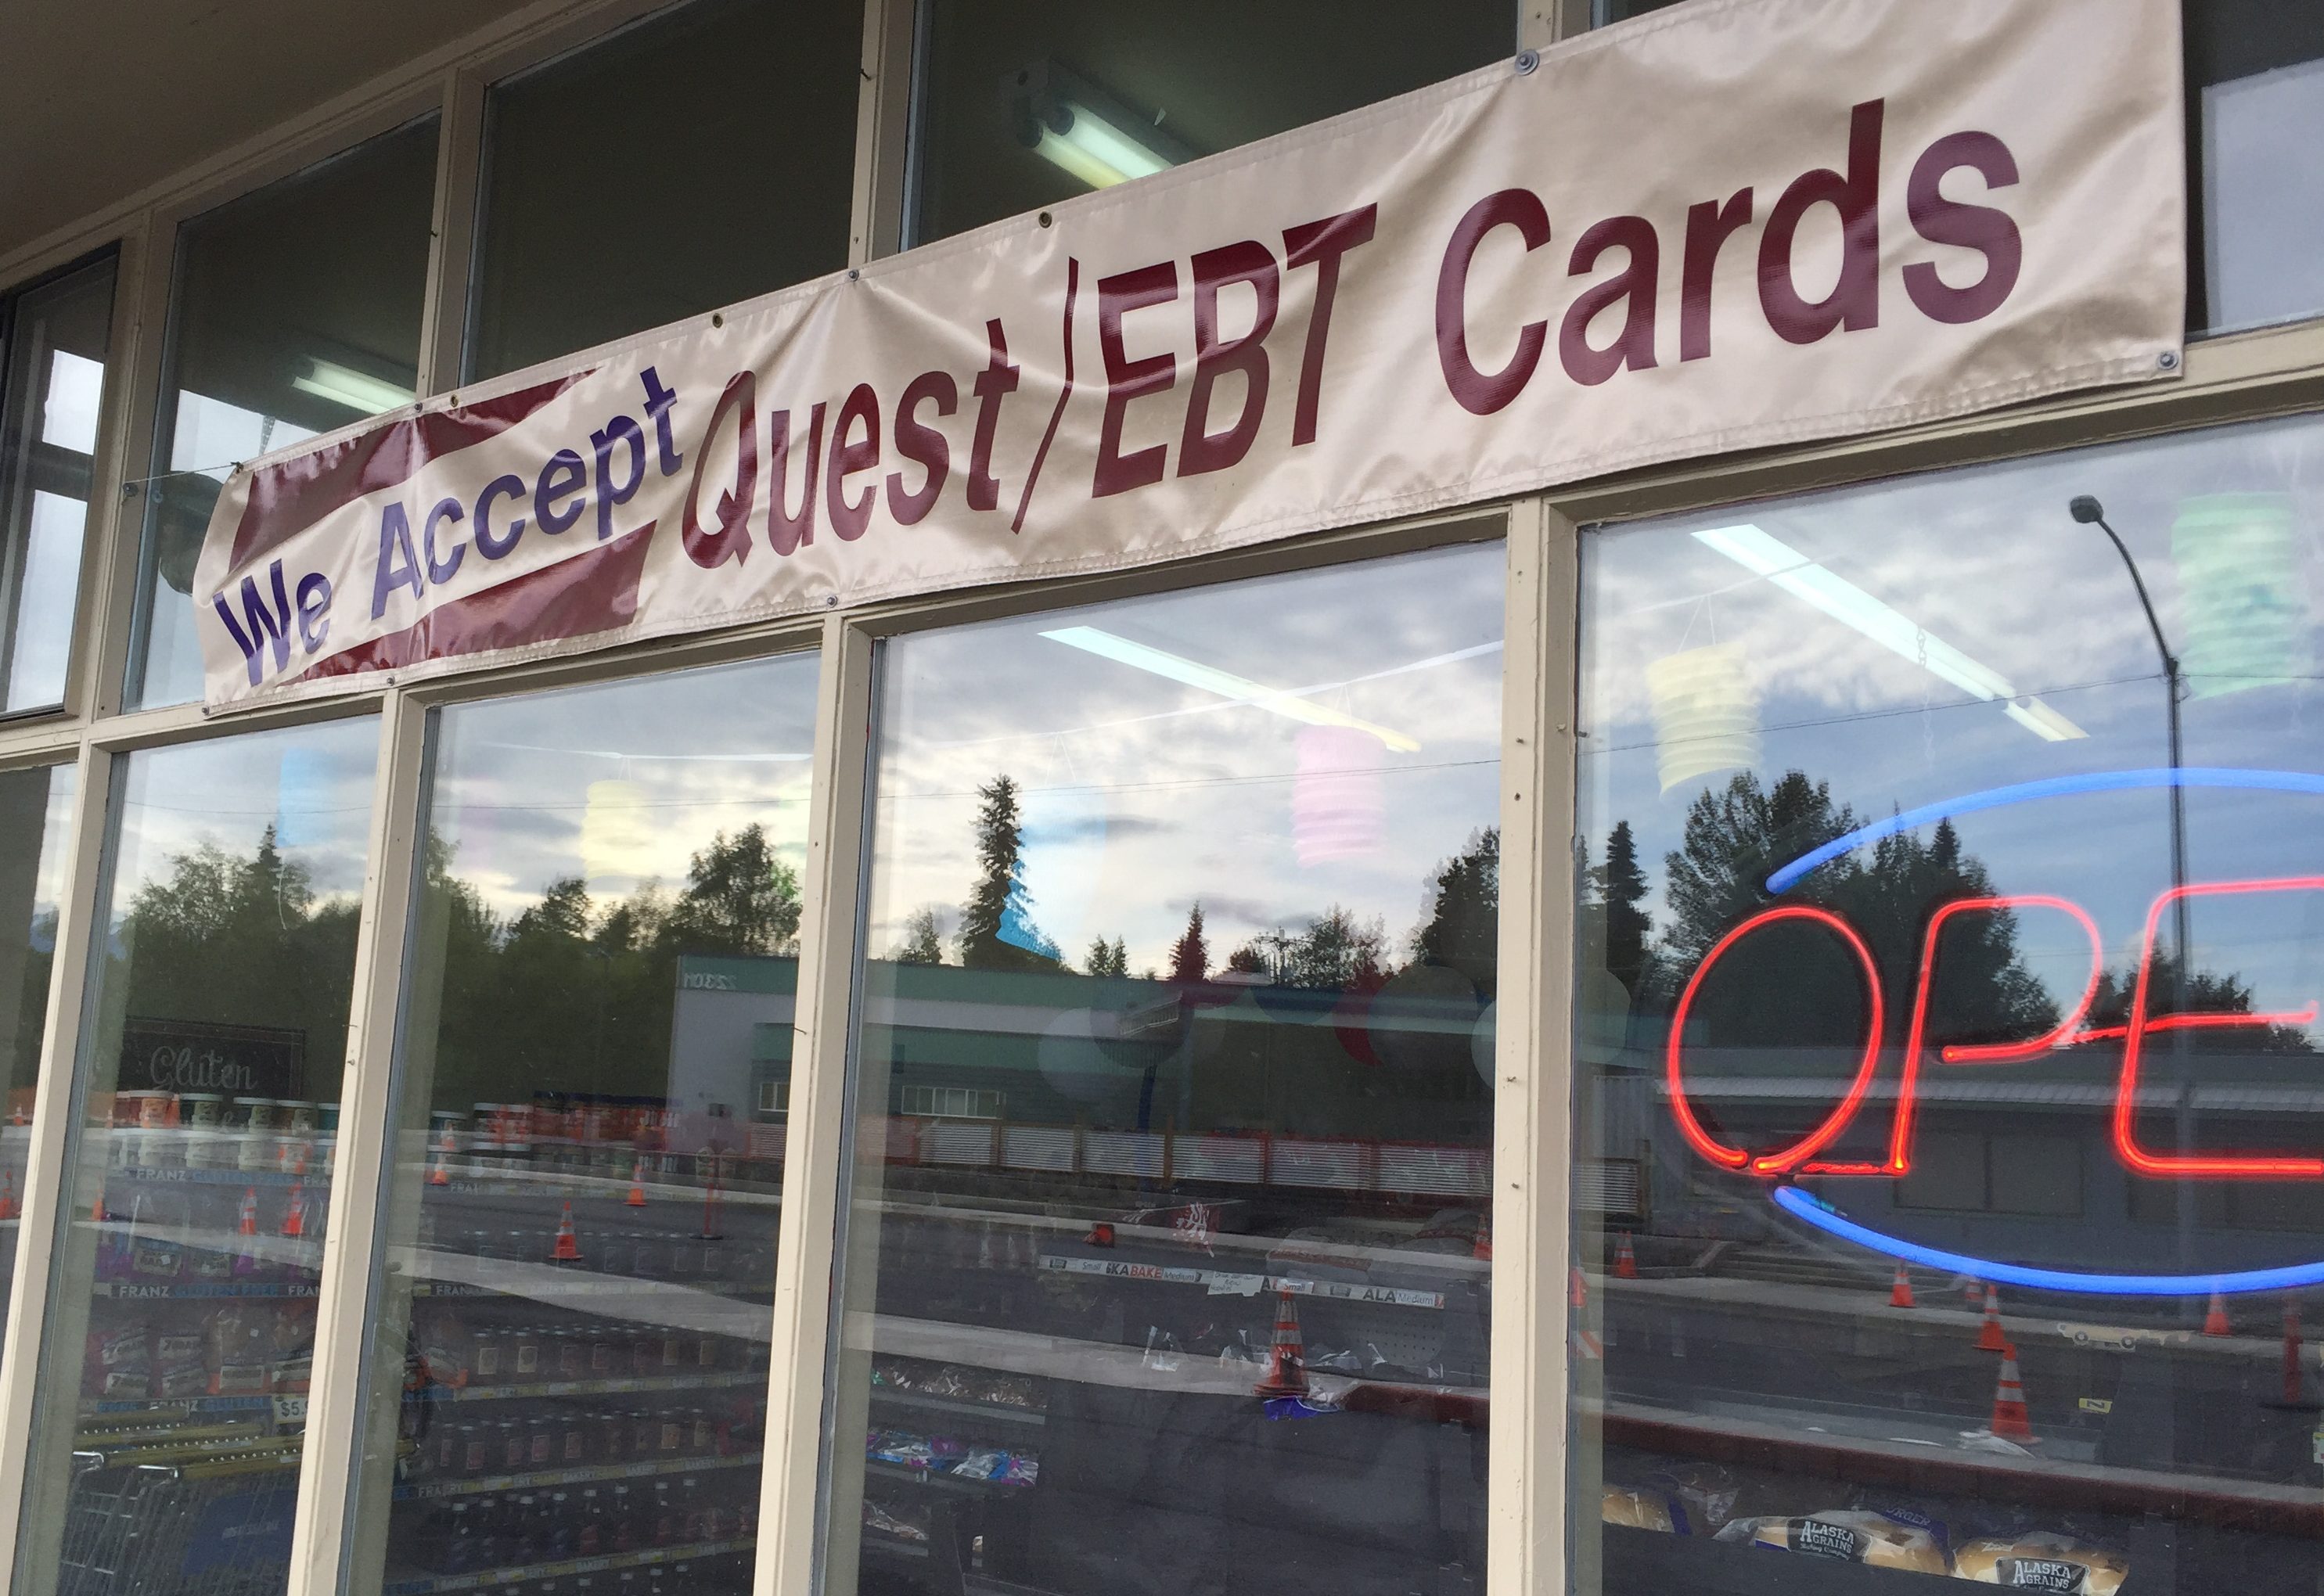 a sign says "We accept Quest/EBT cards"